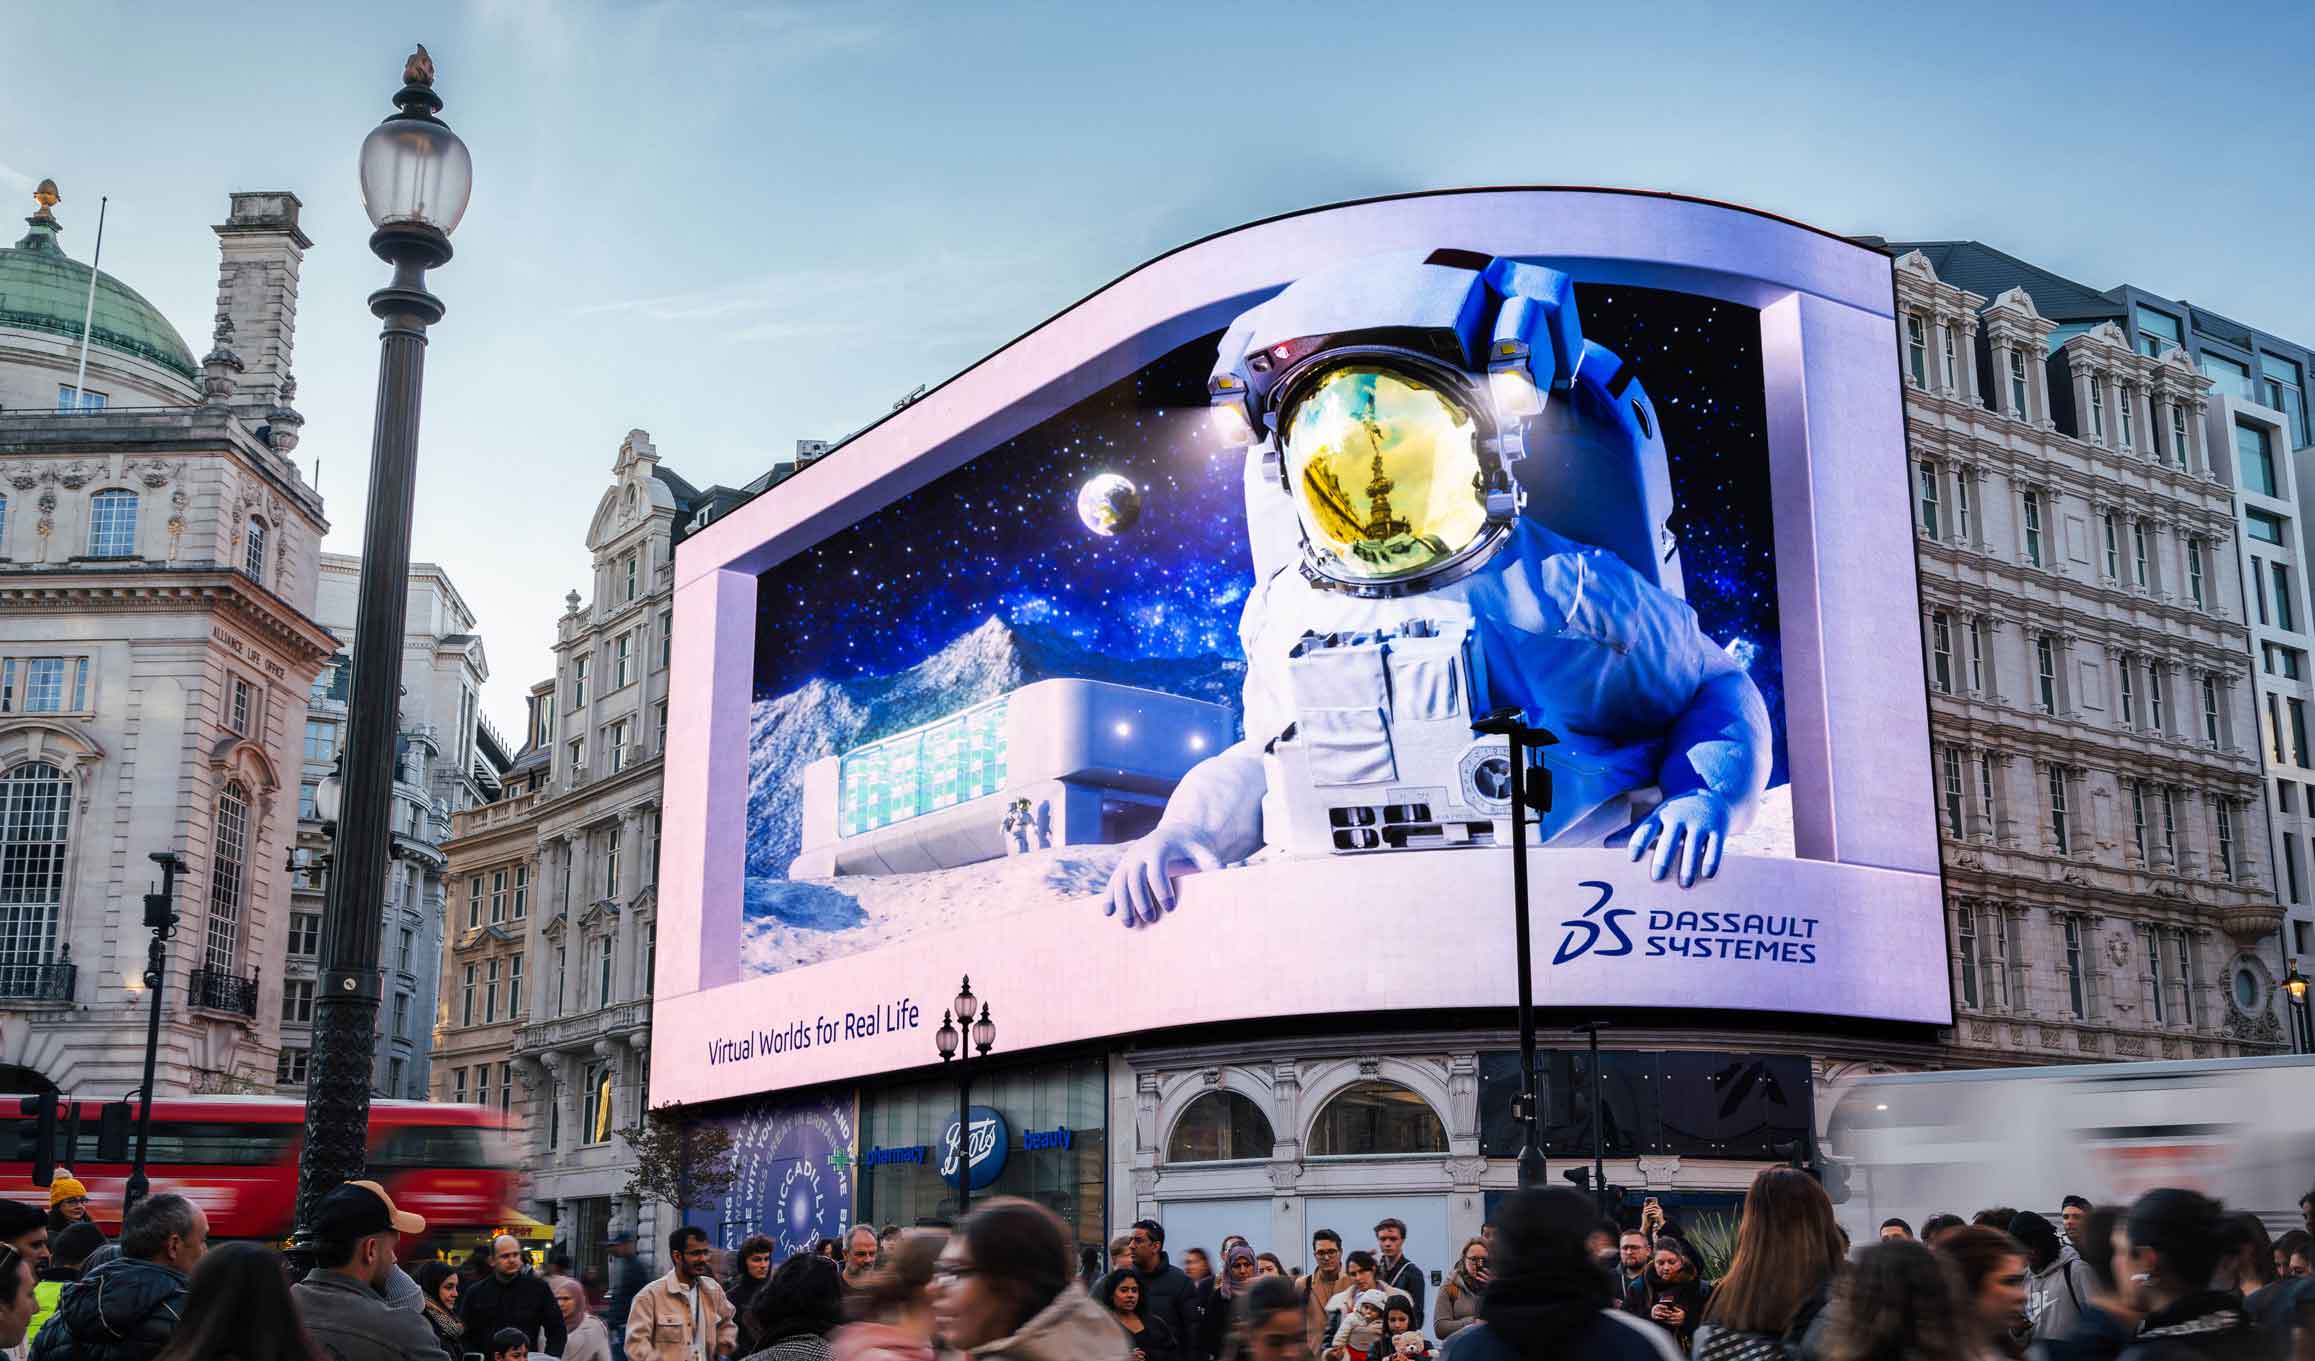 Dassault Systèmes introduces virtual worlds for real life to Piccadilly Circus